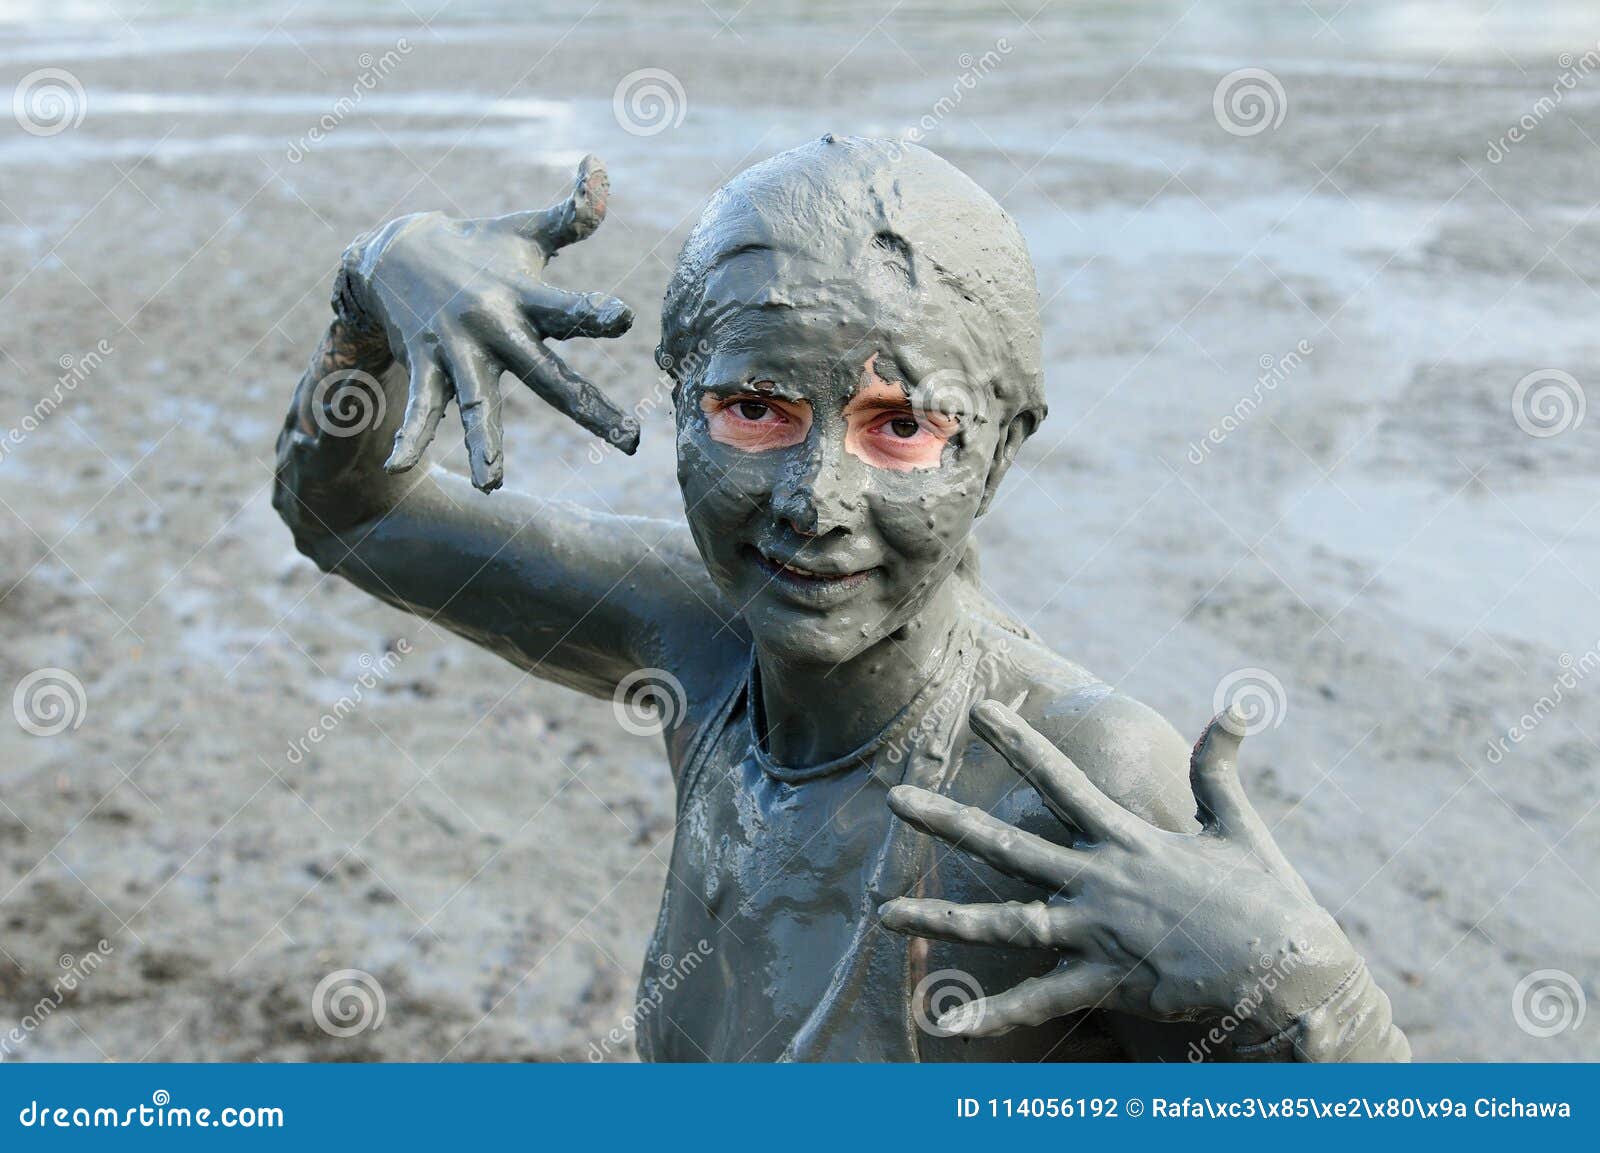 mud baths in colombia